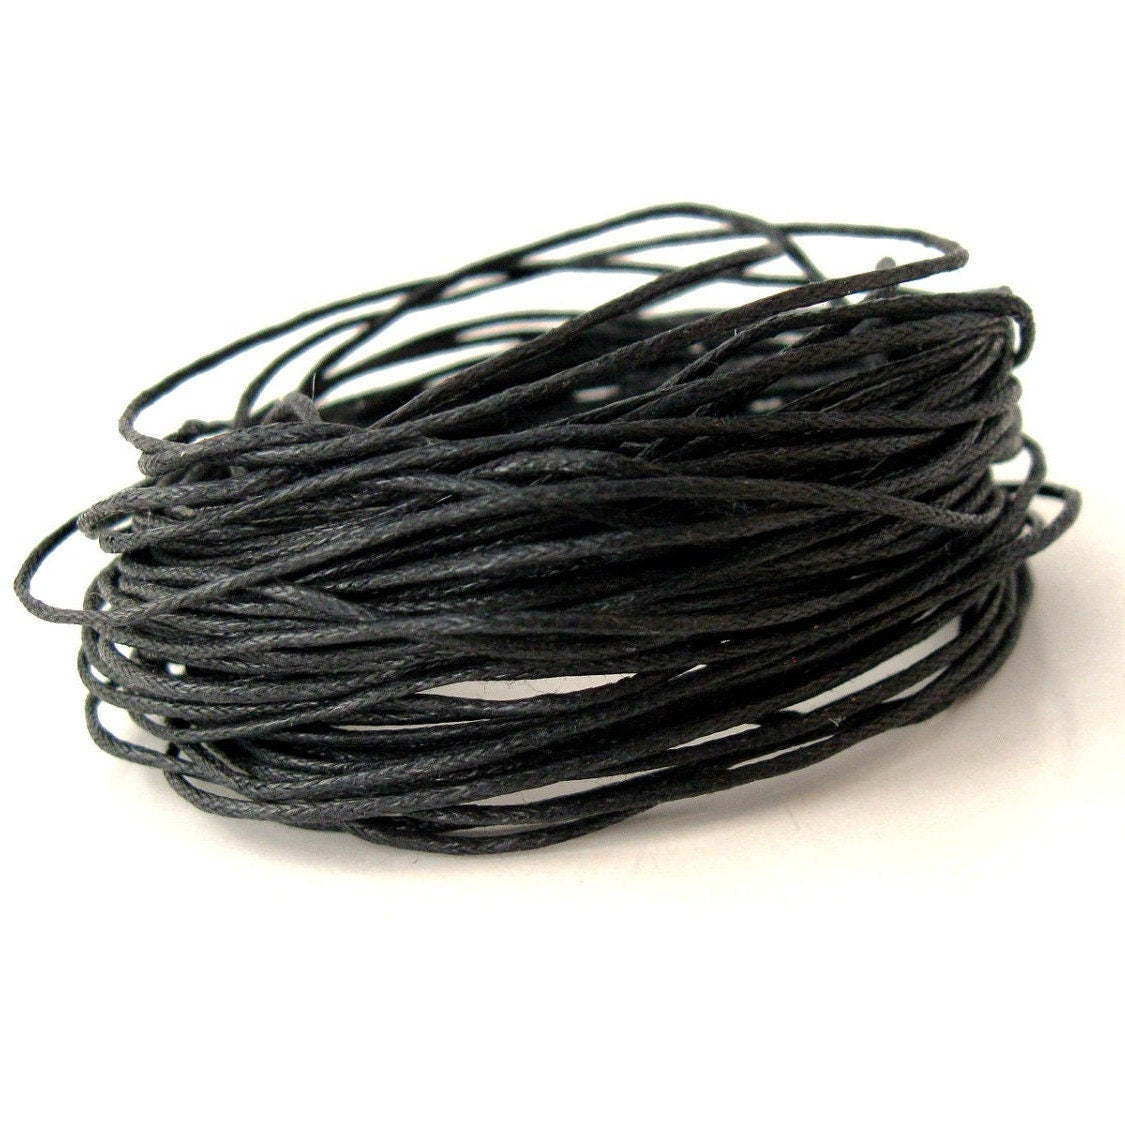 Black waxed cotton cord 1mm - 10 meters / 32.8 ft - Jewelry making string supplies